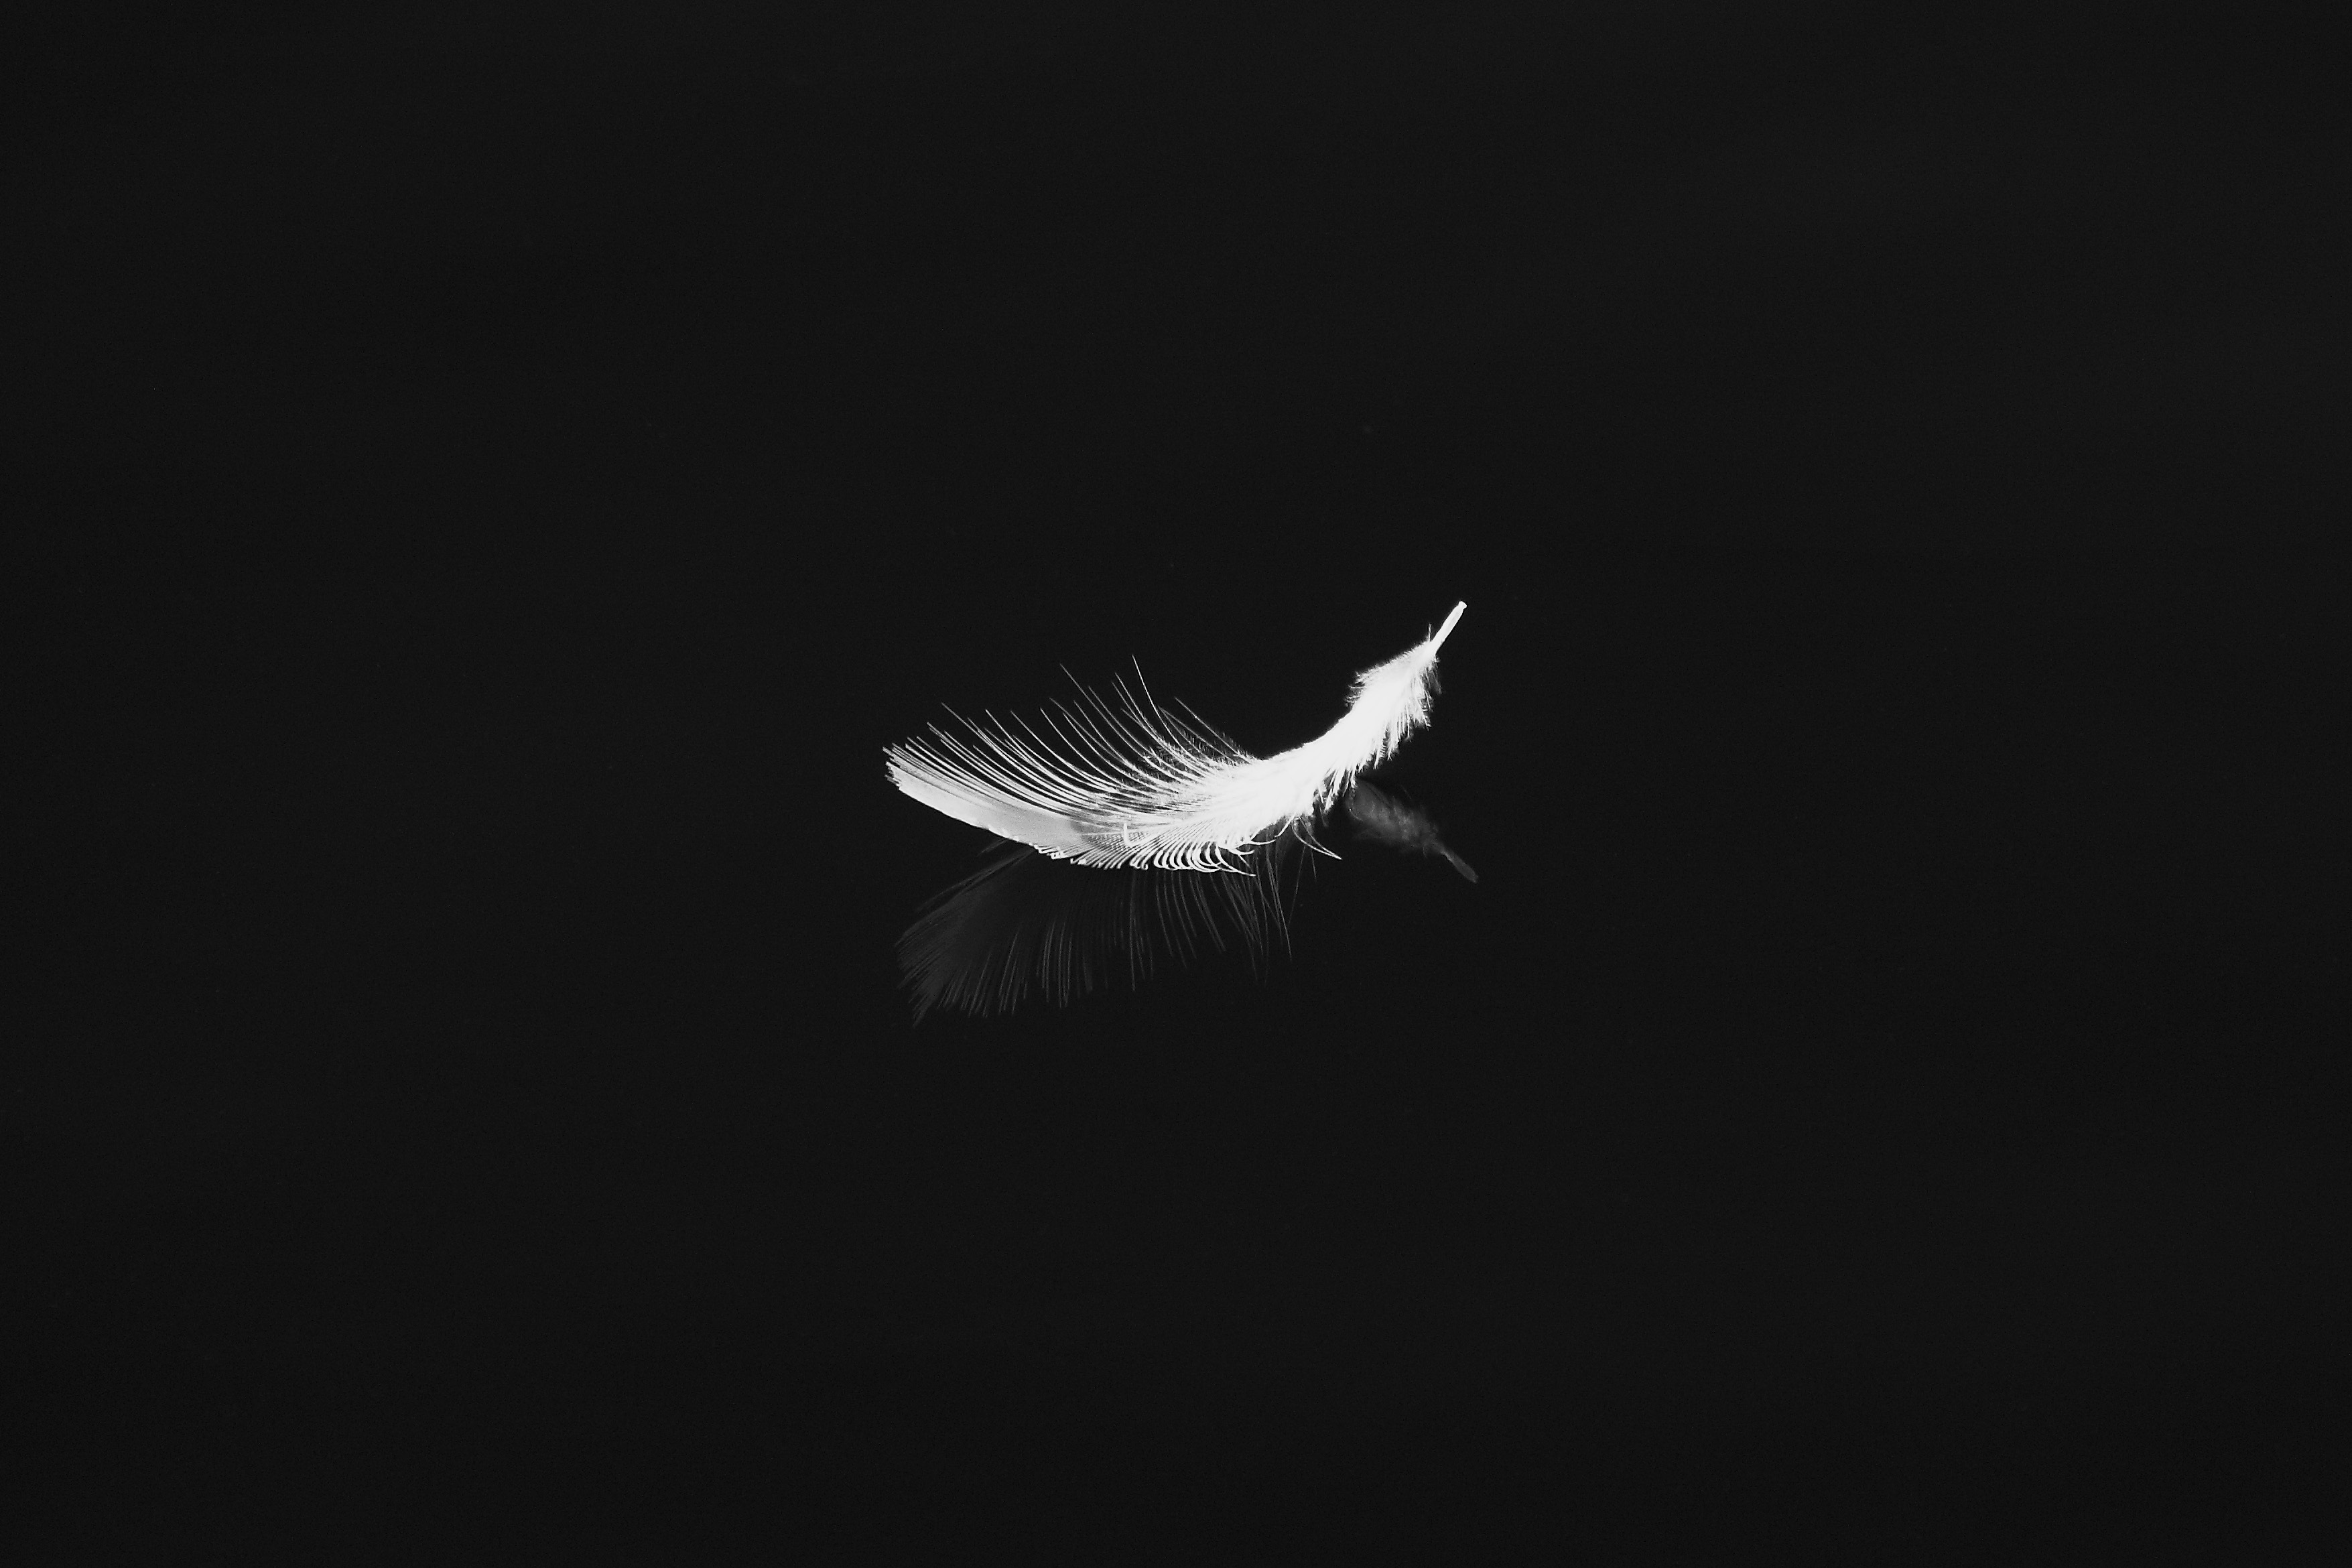 144467 Screensavers and Wallpapers Pen for phone. Download minimalism, white, feather, reflection, bw, chb, pen pictures for free